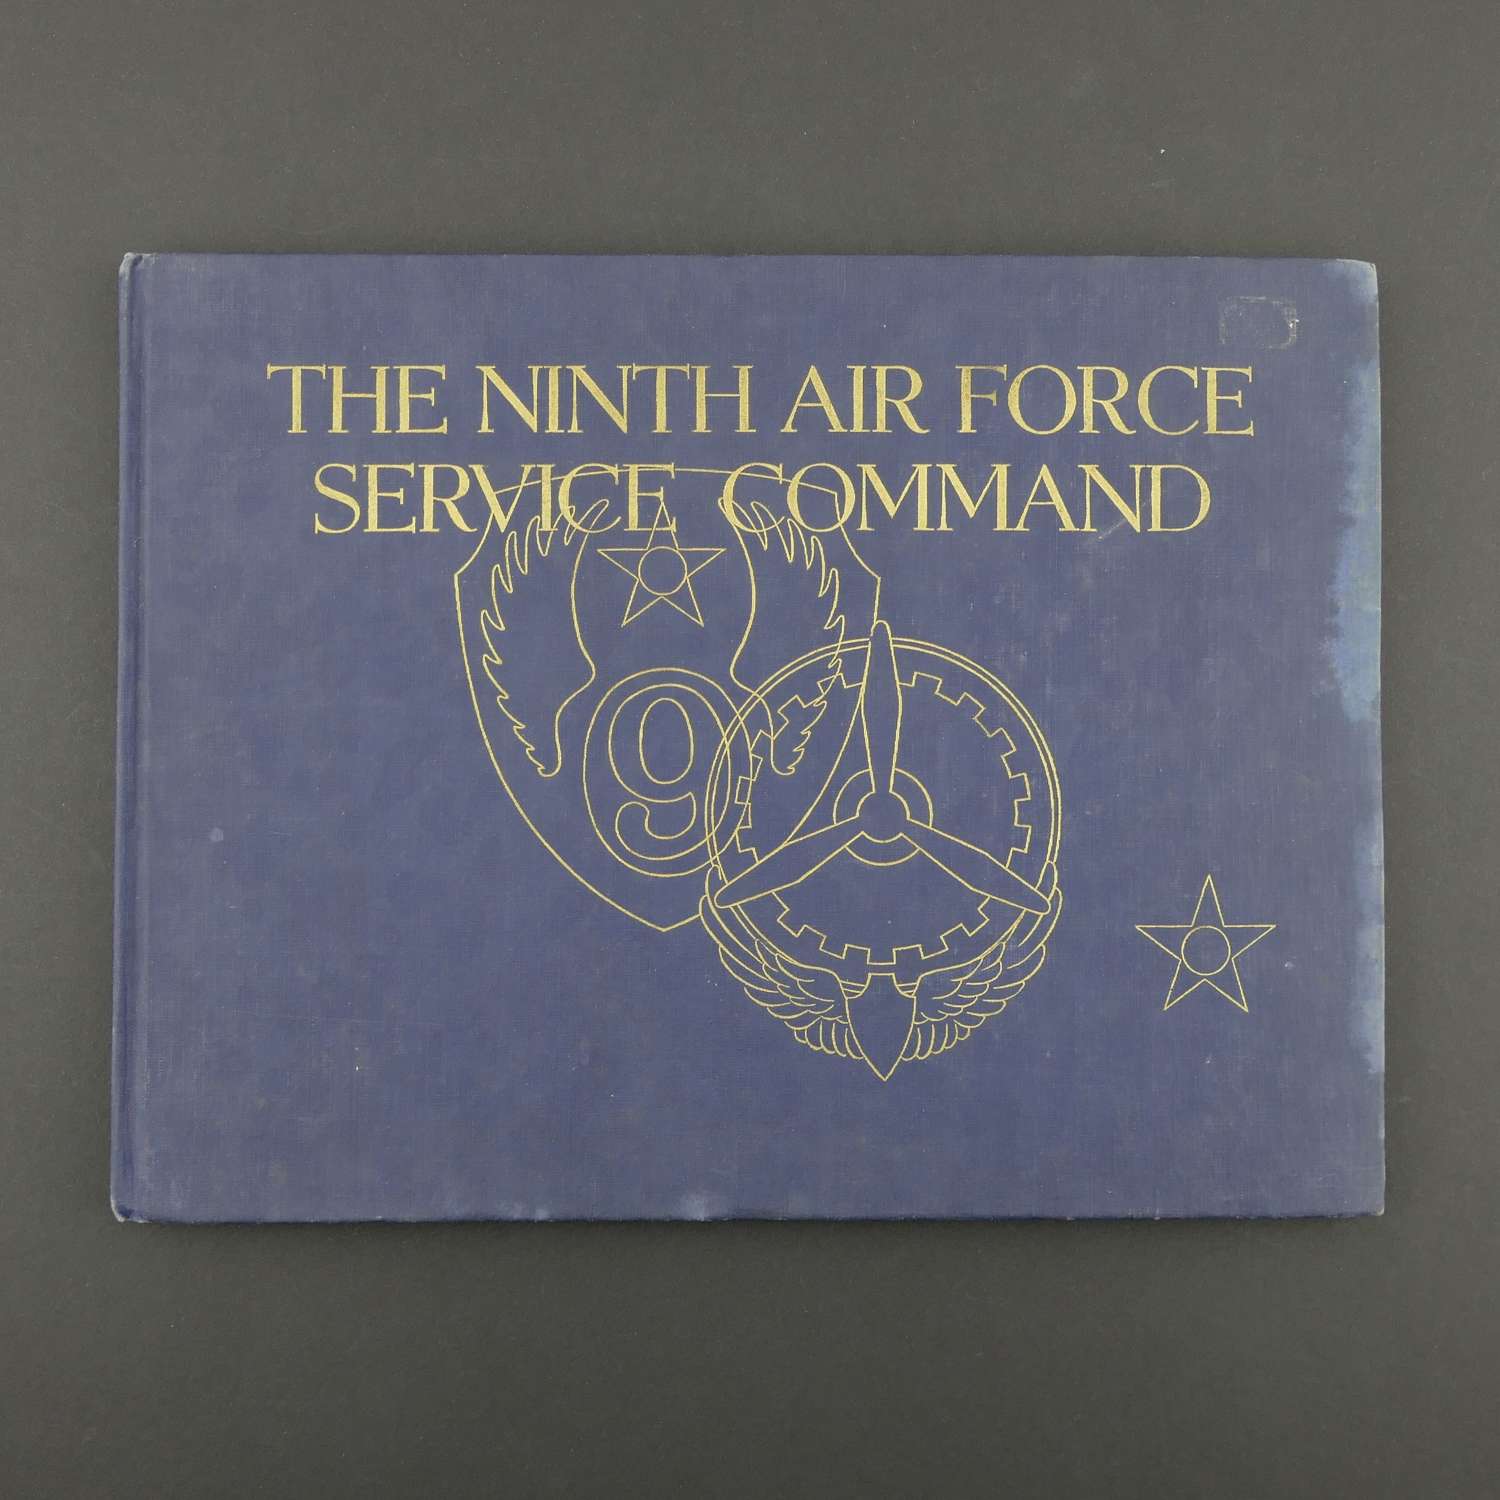 USAAF Ninth Air Force Service Command history